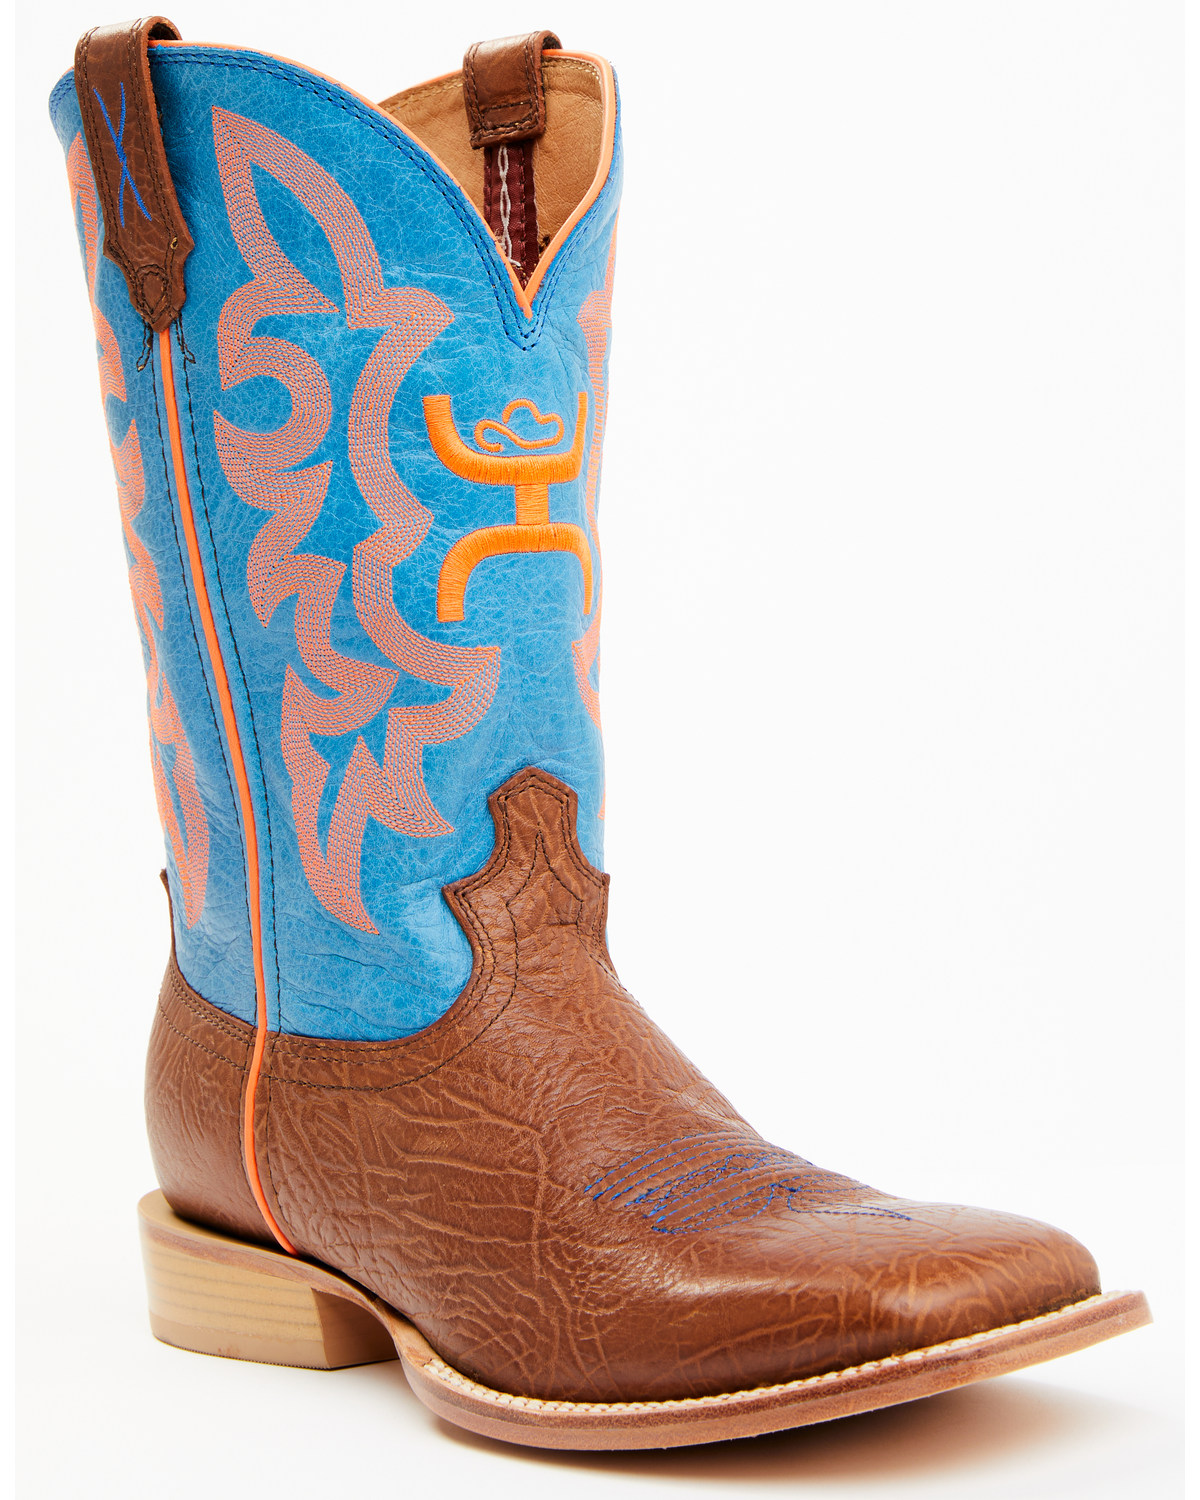 HOOey by Twisted X Men's Square Toe Western Boots